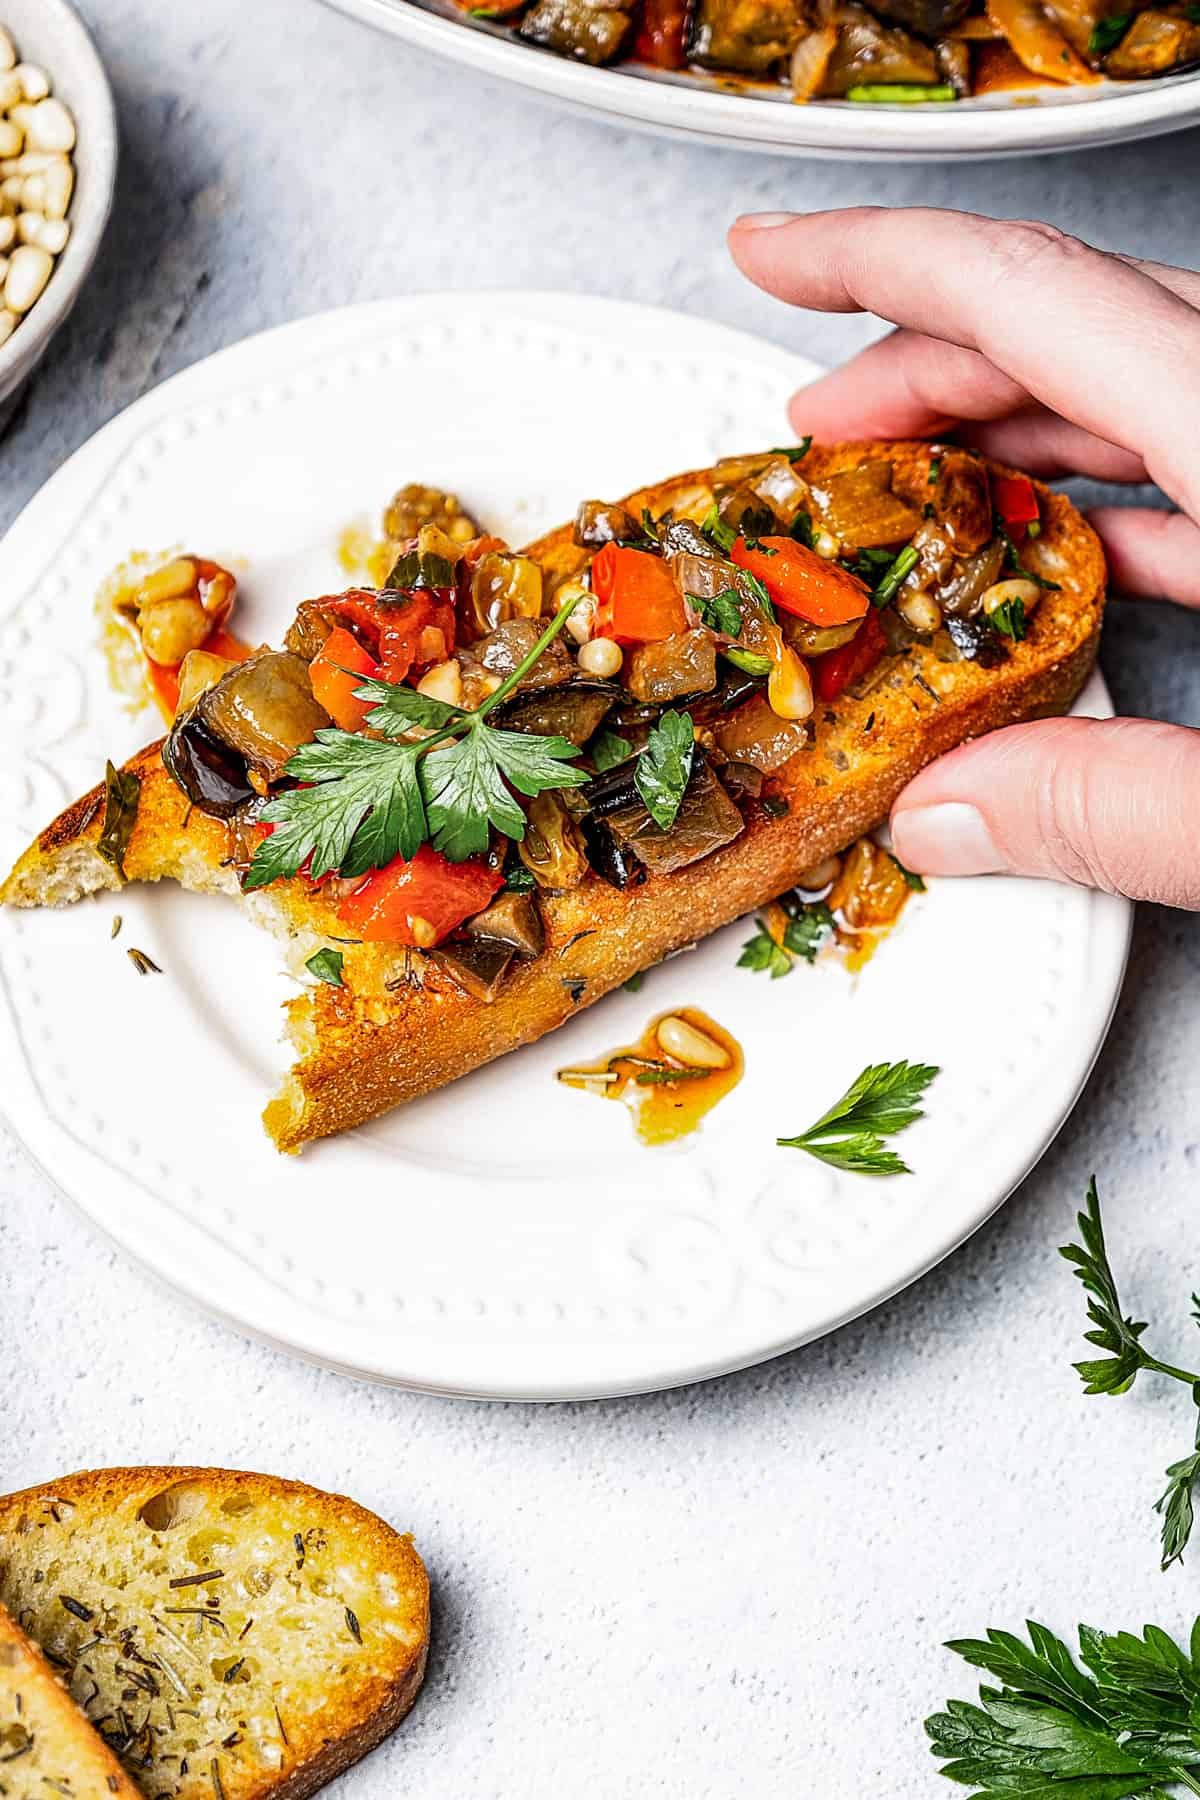 A slice of toasted bread topped with eggplant relish. One bite has been taken from the end of the toast.